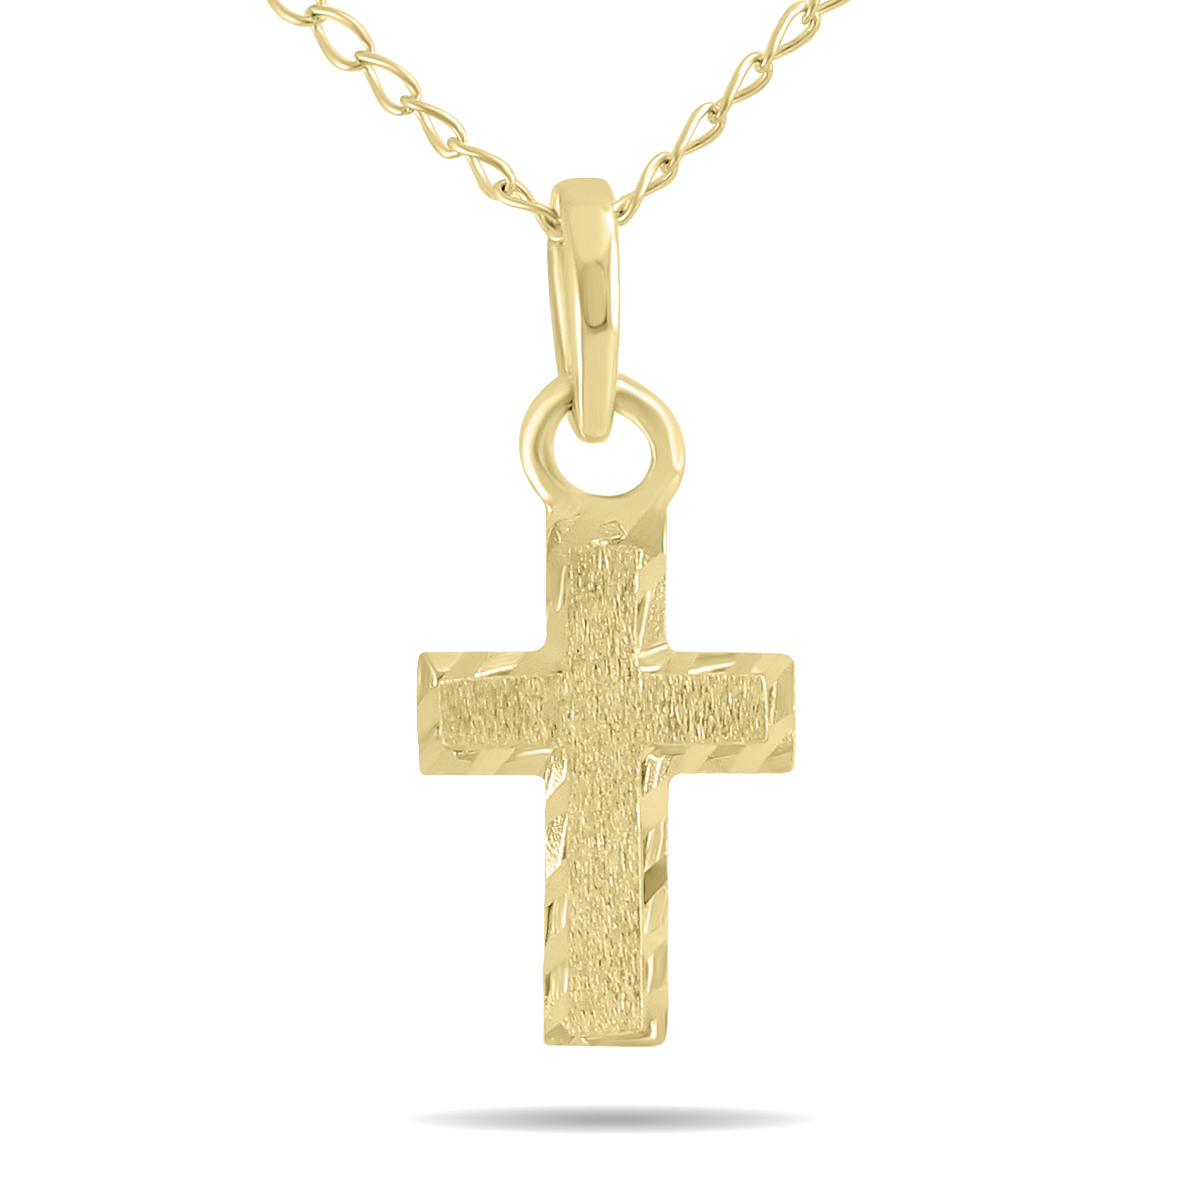 10K Yellow Gold Small Cross Pendant Necklace